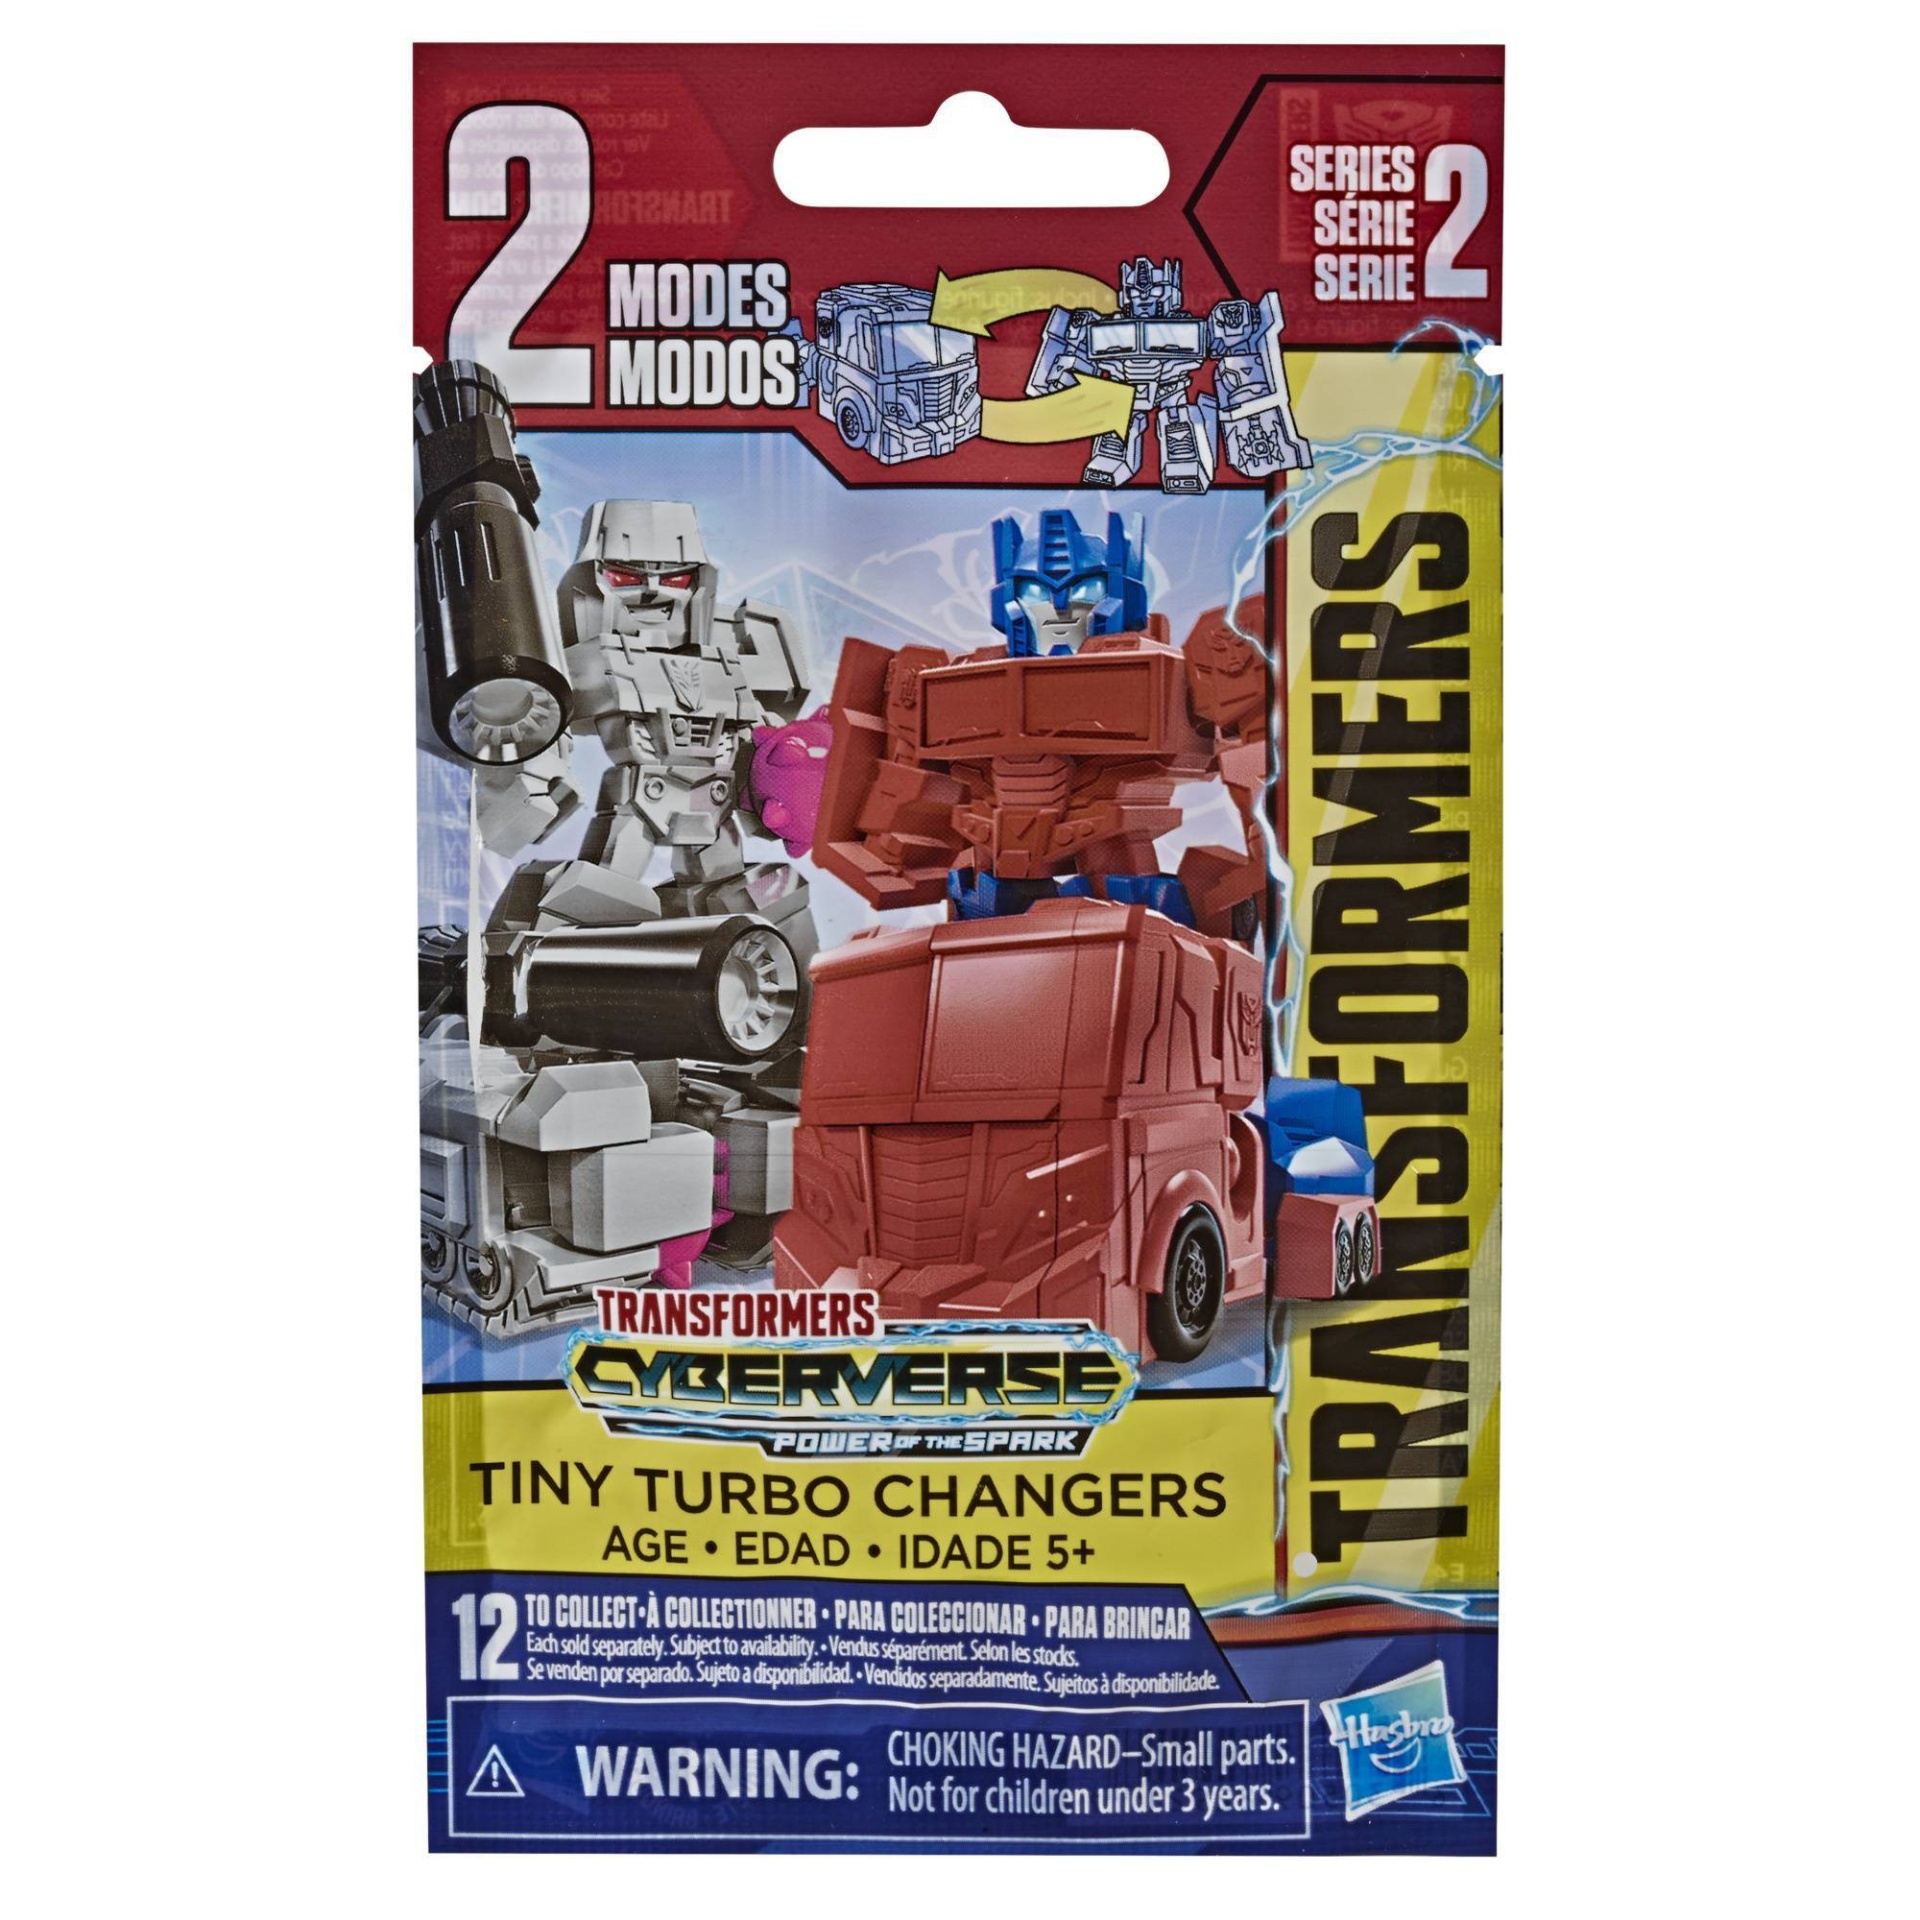 slide 1 of 6, Hasbro Transformers Cyberverse Tiny Turbo Changers Blind Bag, 1 ct